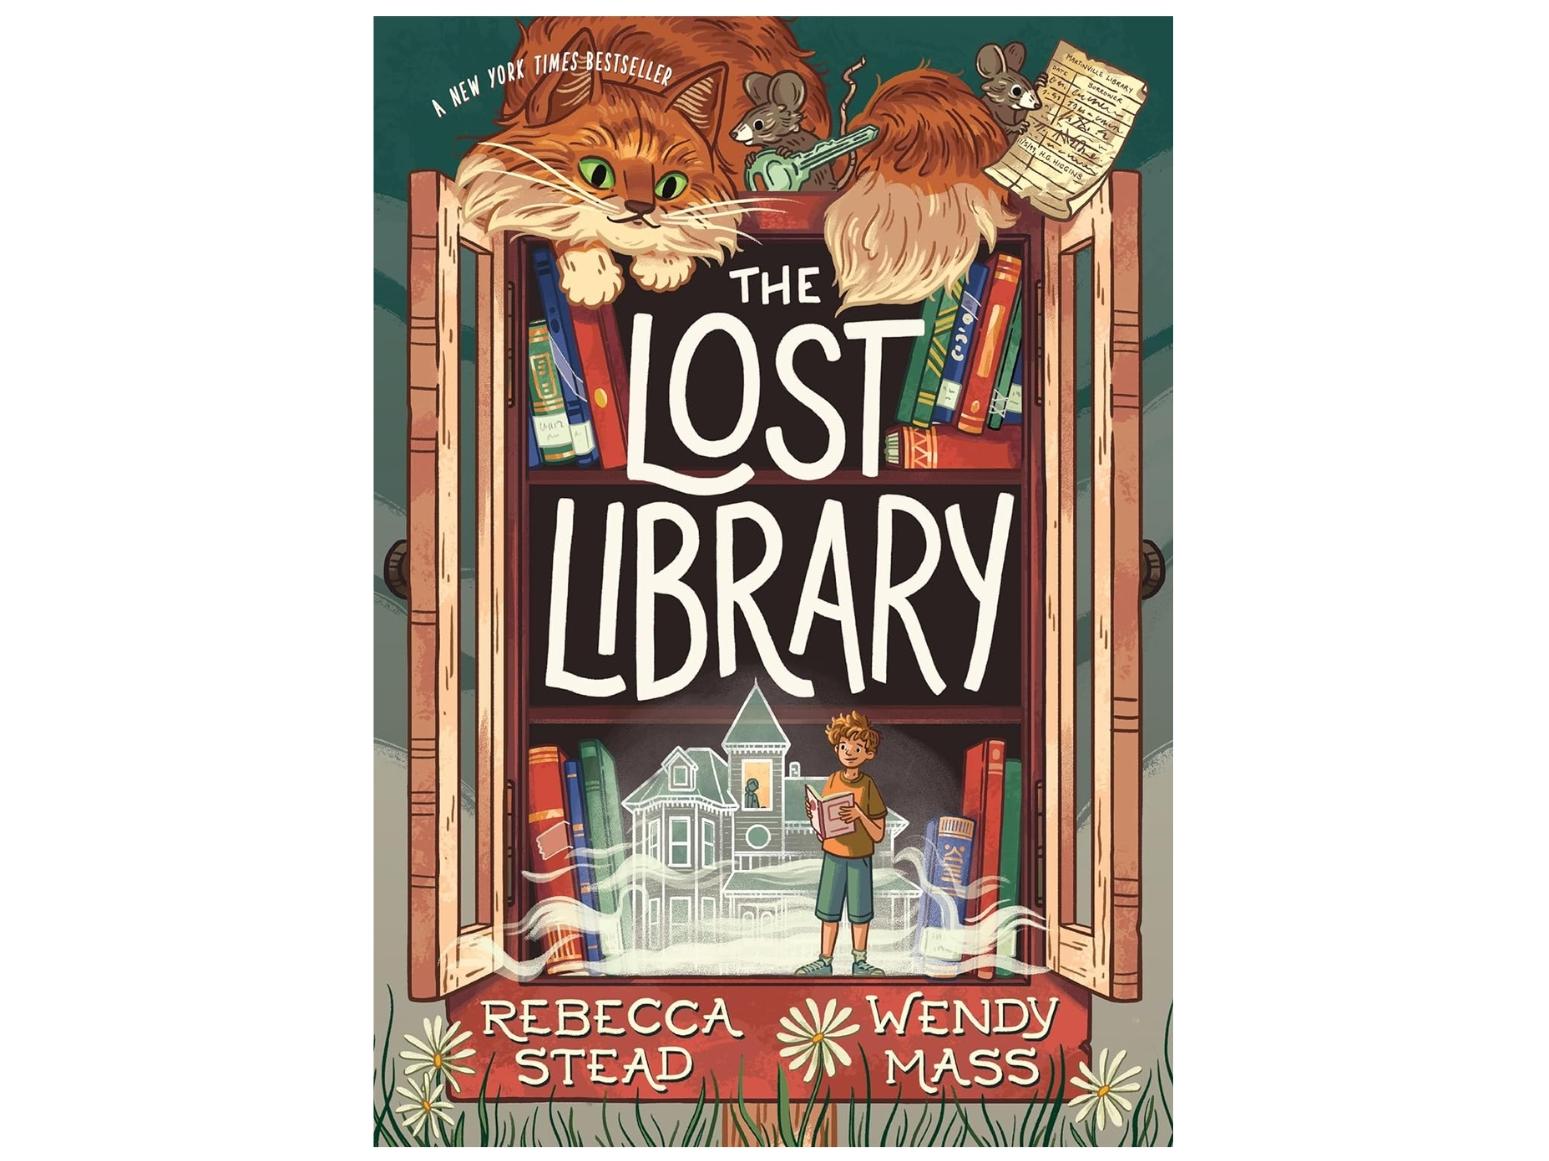 Picture of the book jacket of "The Lost Library" by Rebecca Stead adn Wendy Mass.